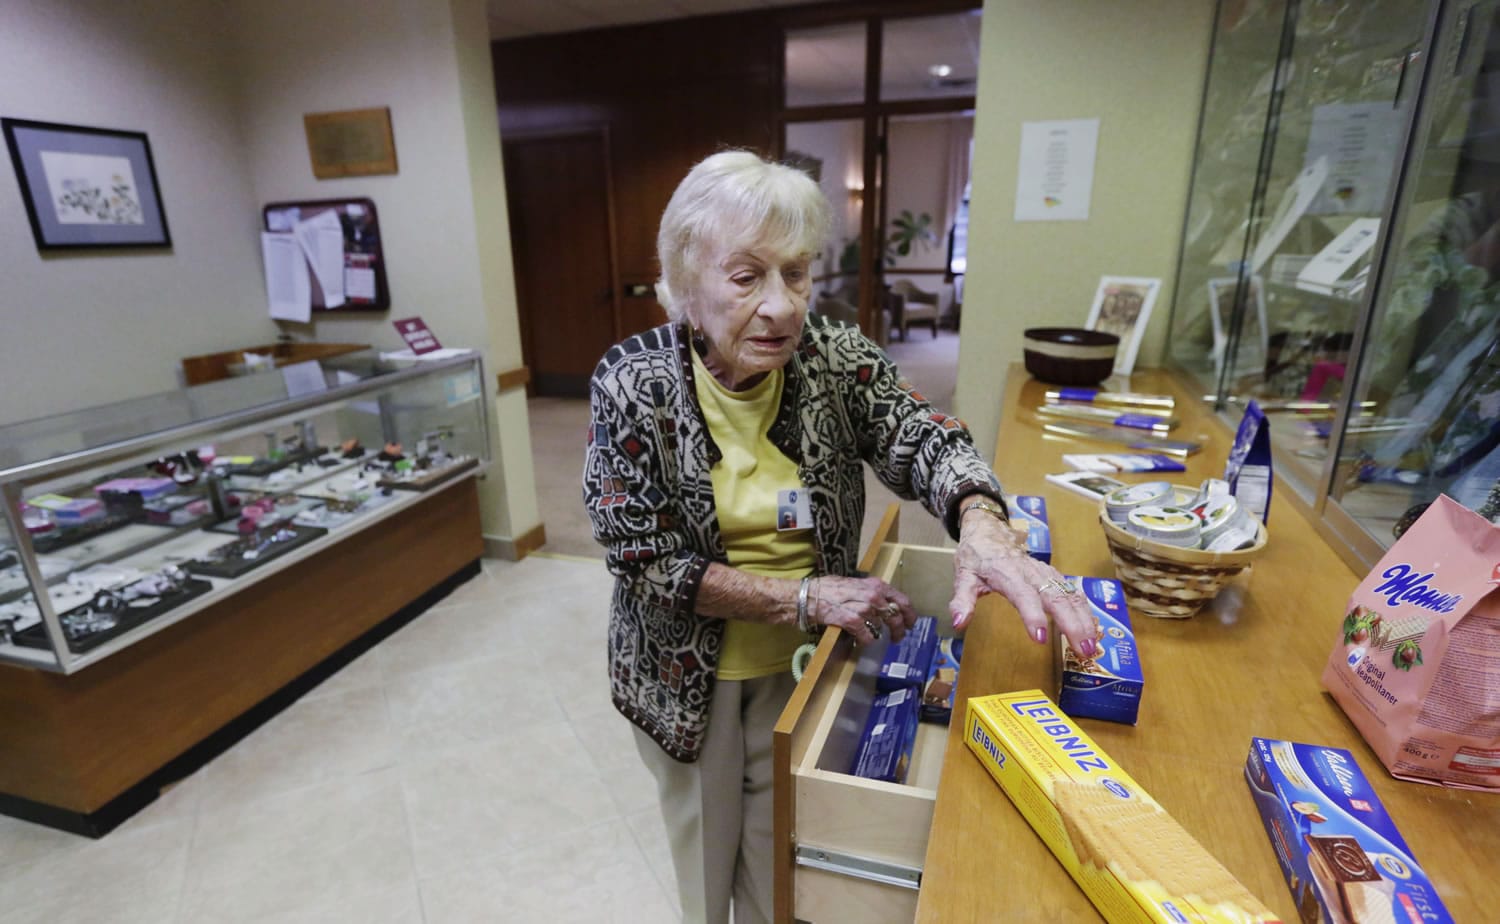 92-year-old Edith Stern works in the gift shop at her retirement home in Chicago.